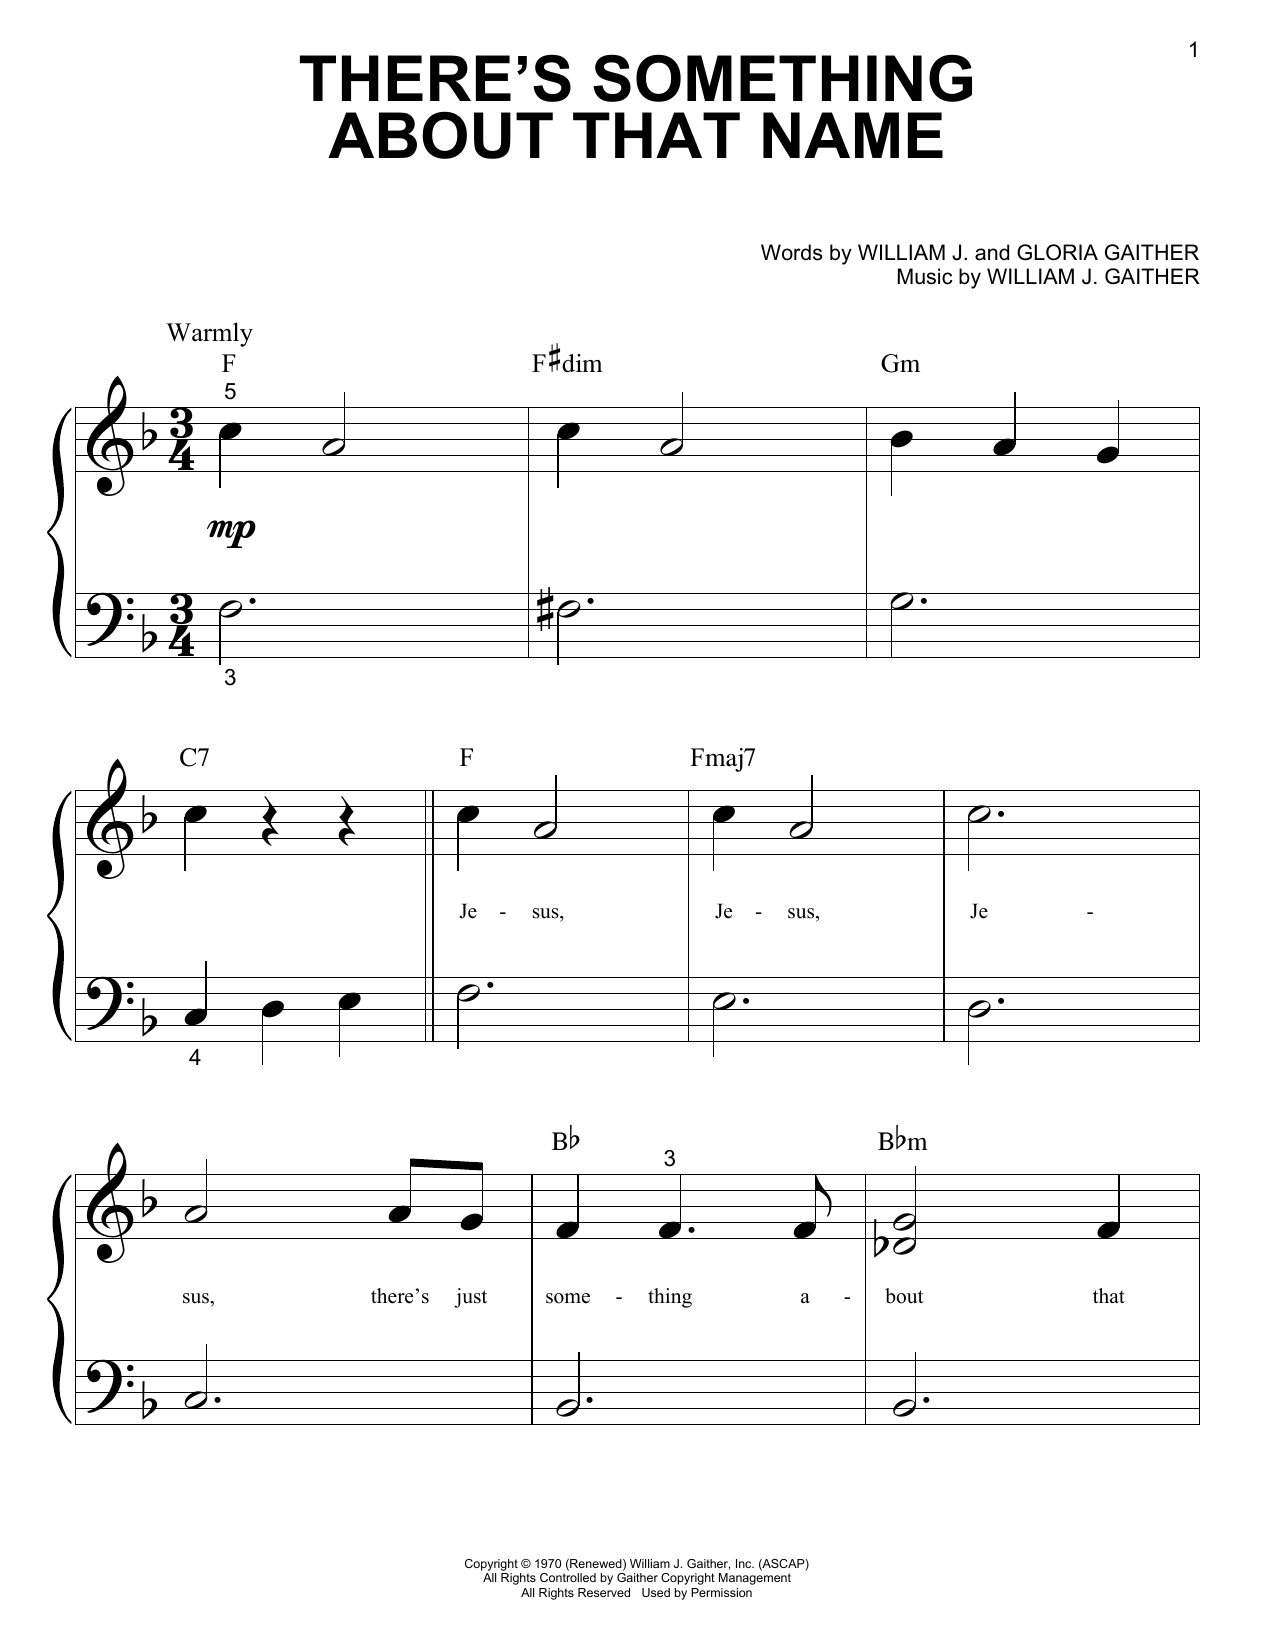 Download Bill & Gloria Gaither There's Something About That Name Sheet Music